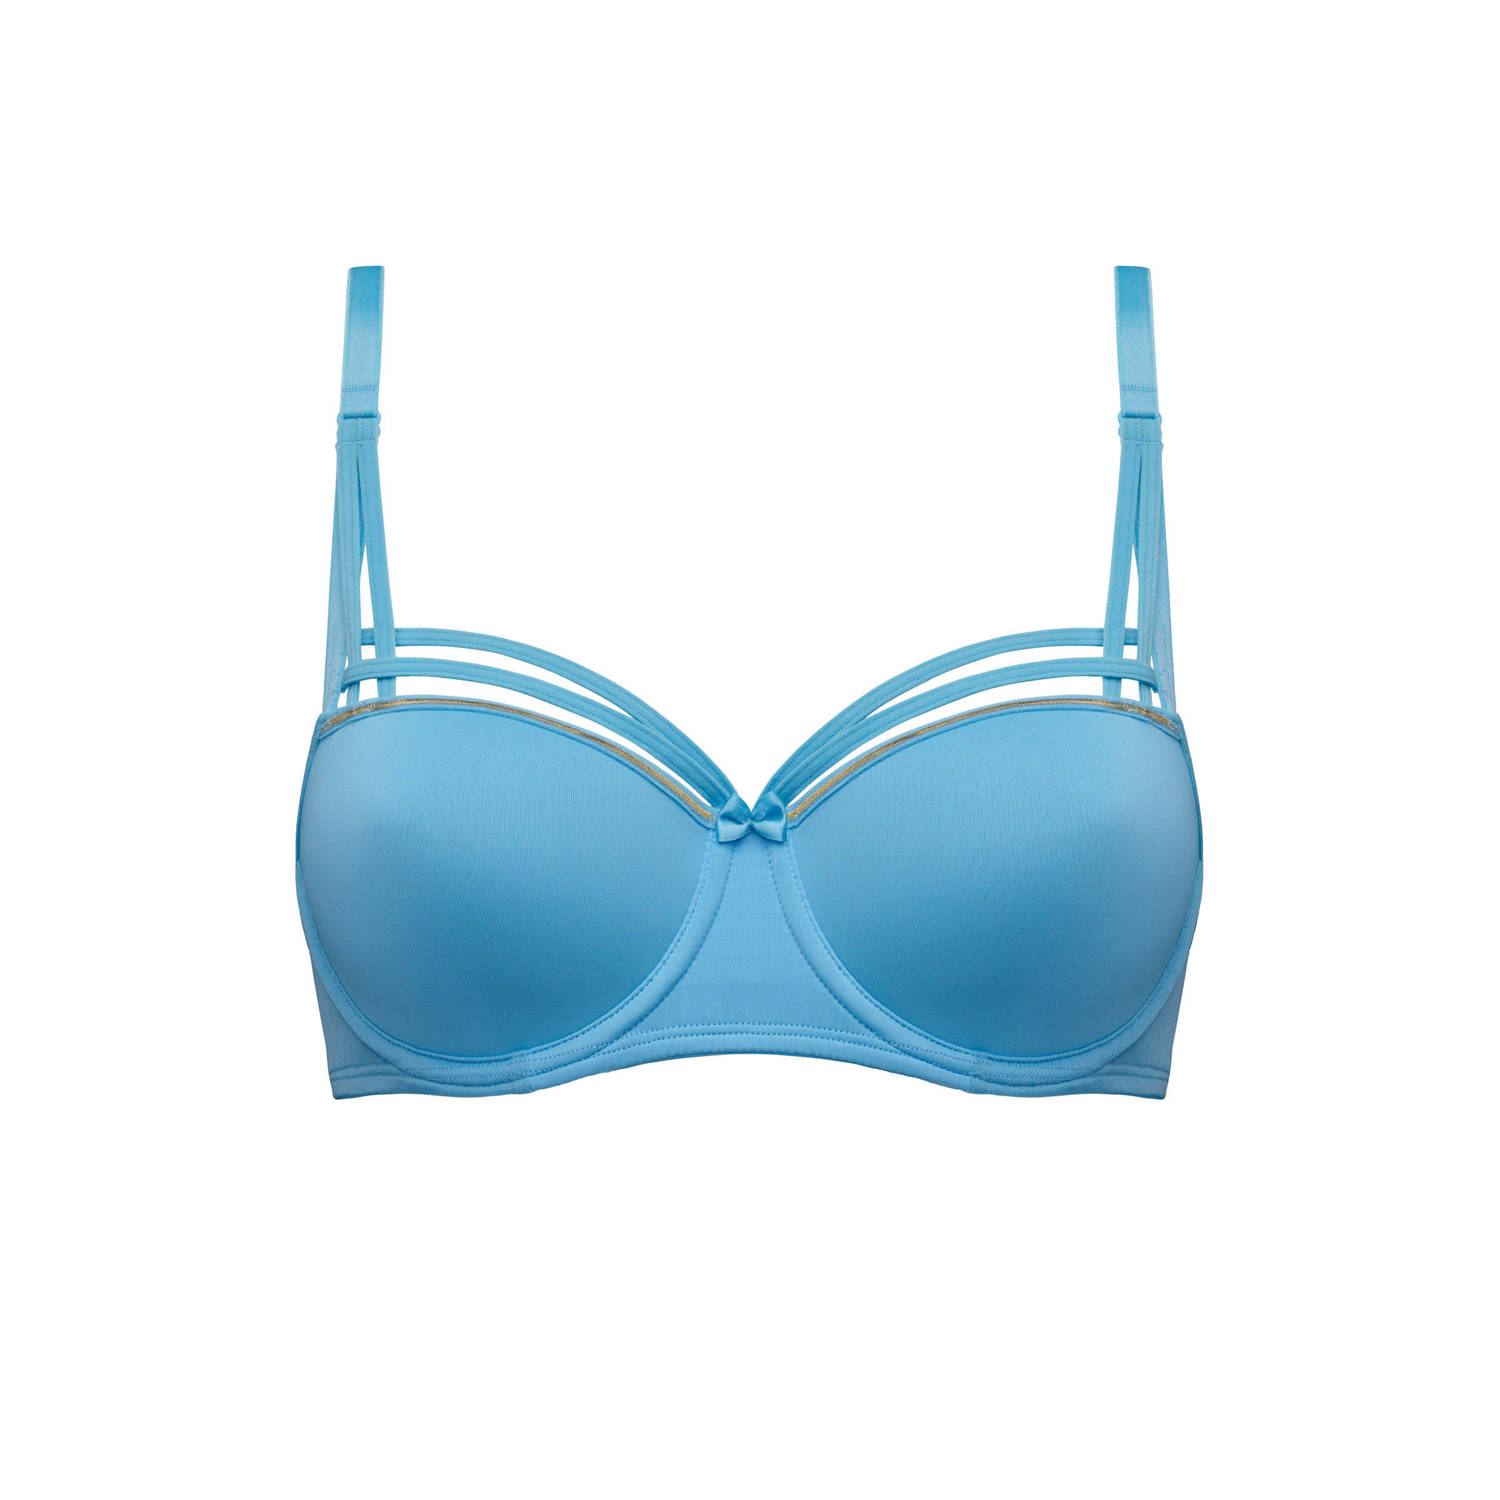 Marlies Dekkers dame de paris balconette bh wired padded baltic sea and gold